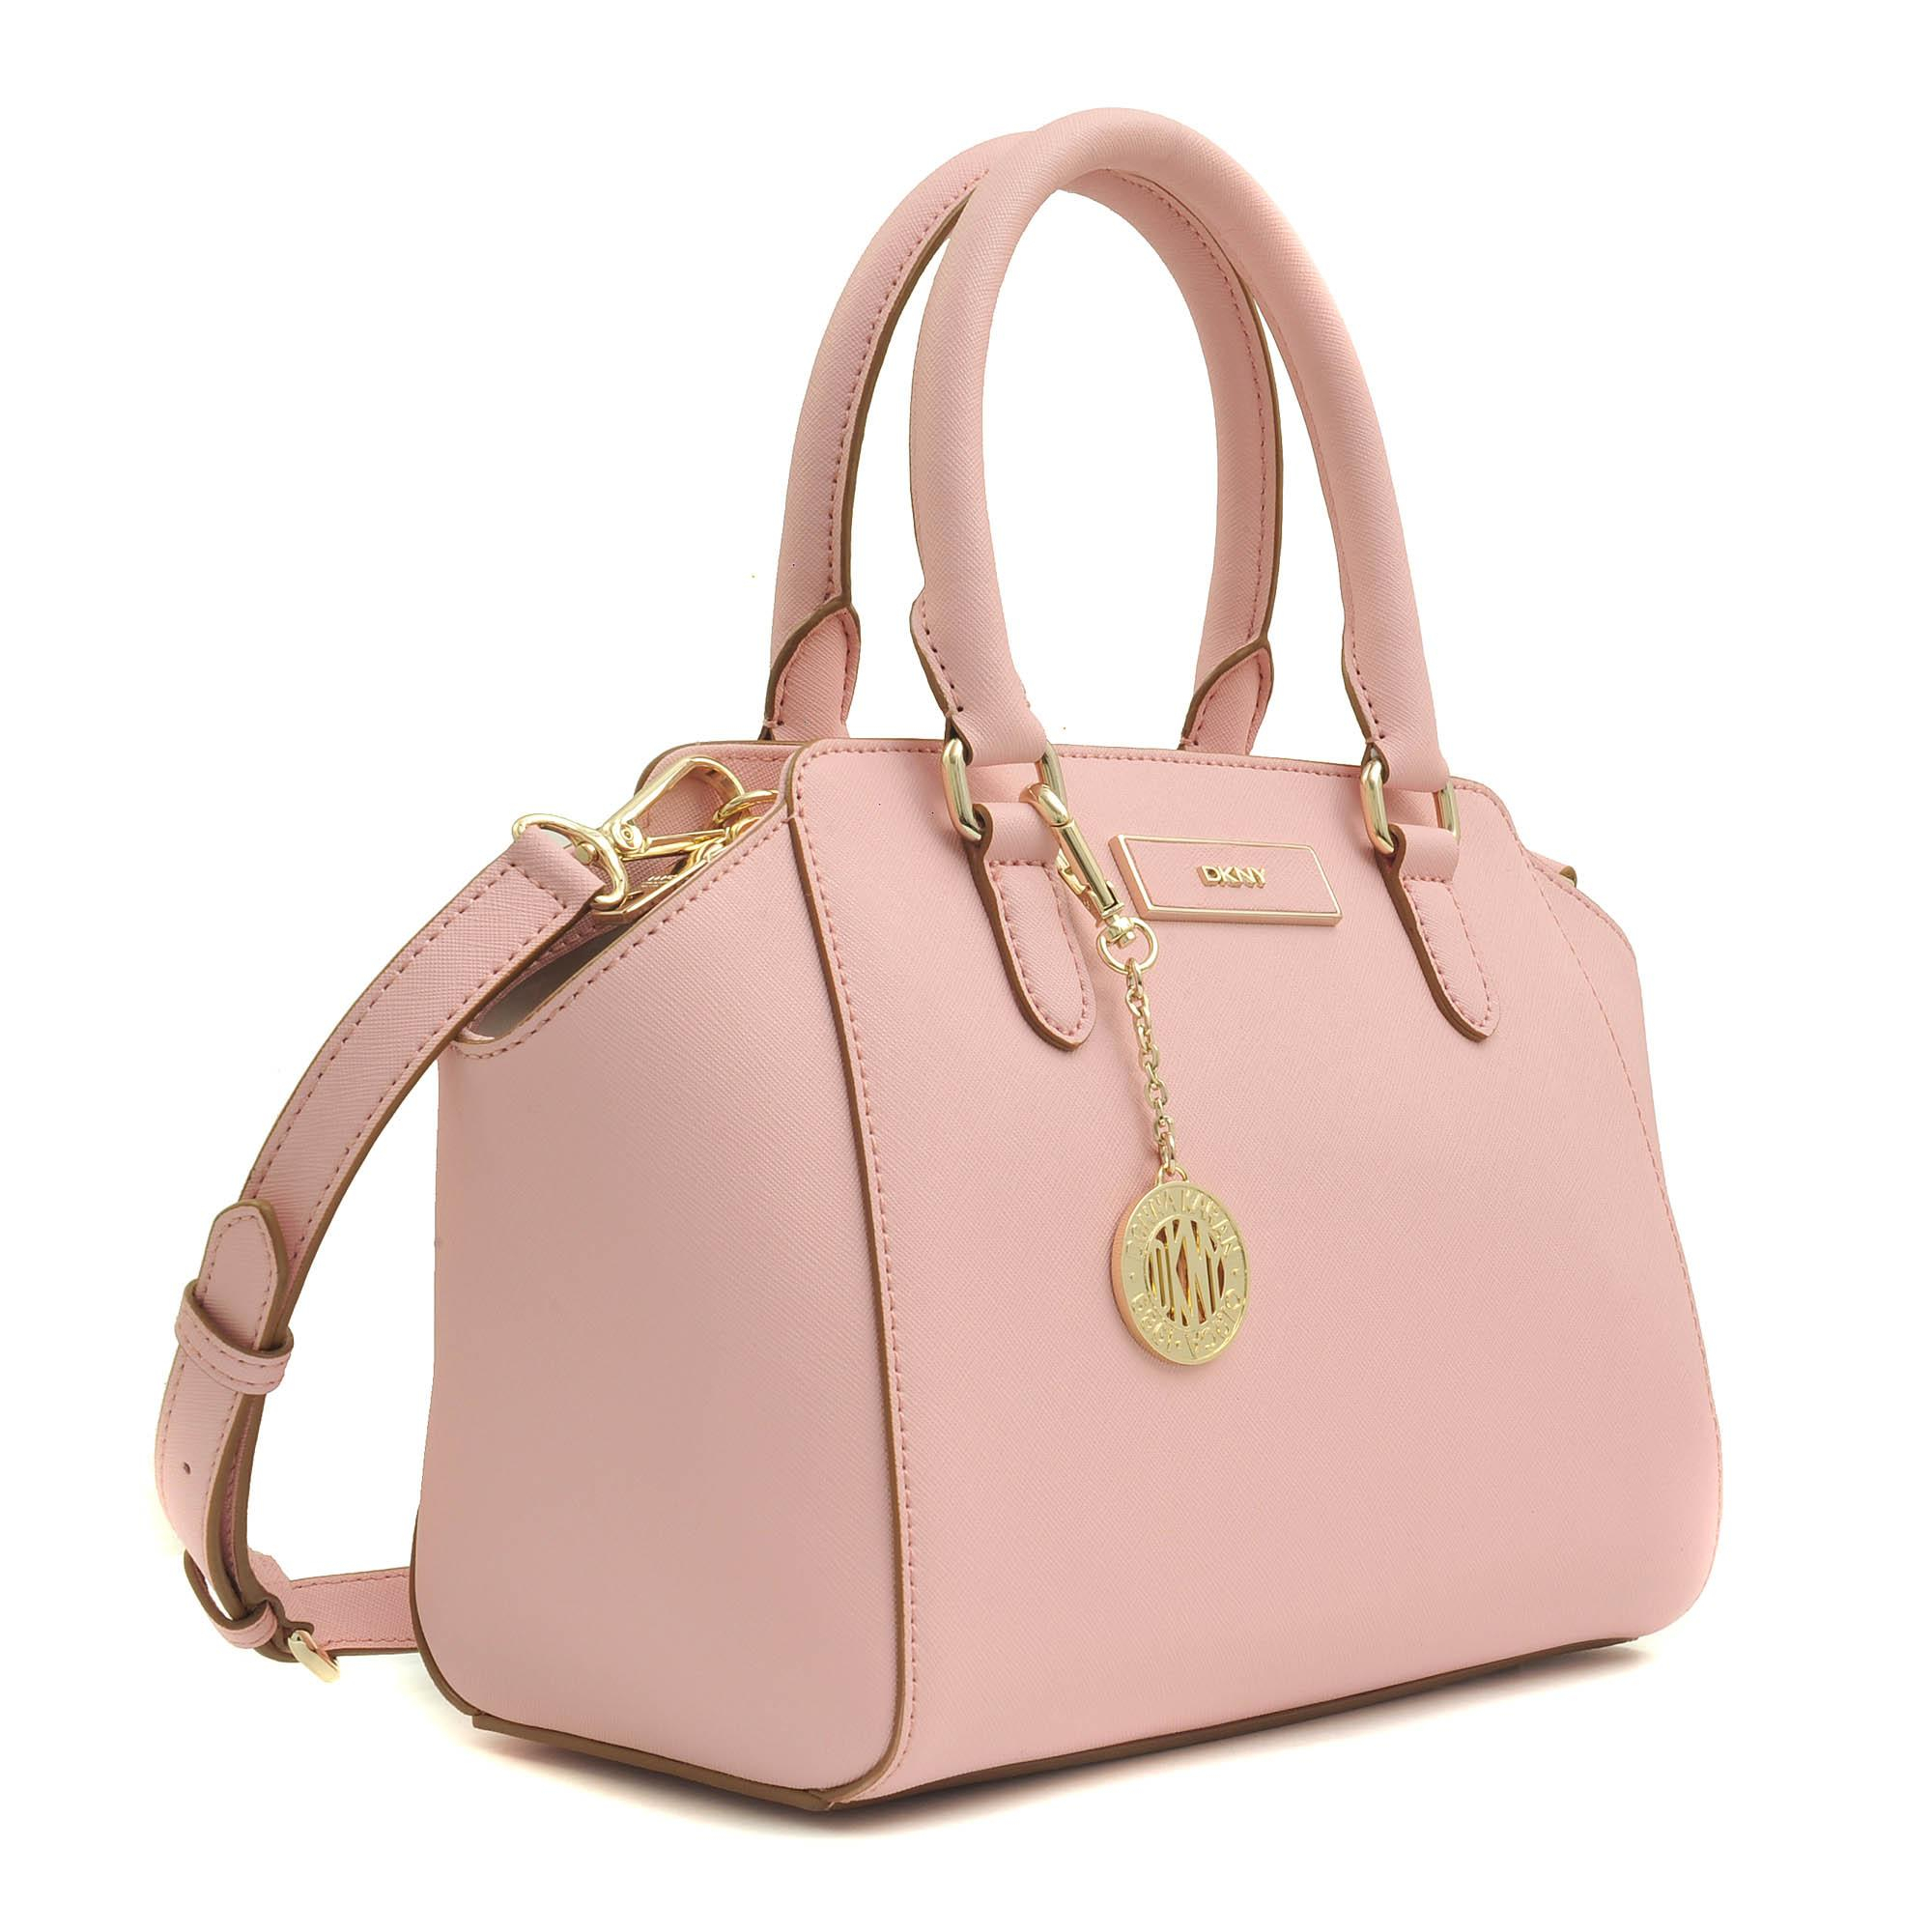 Dkny Saffiano Sm Tote Bag in Pink | Lyst